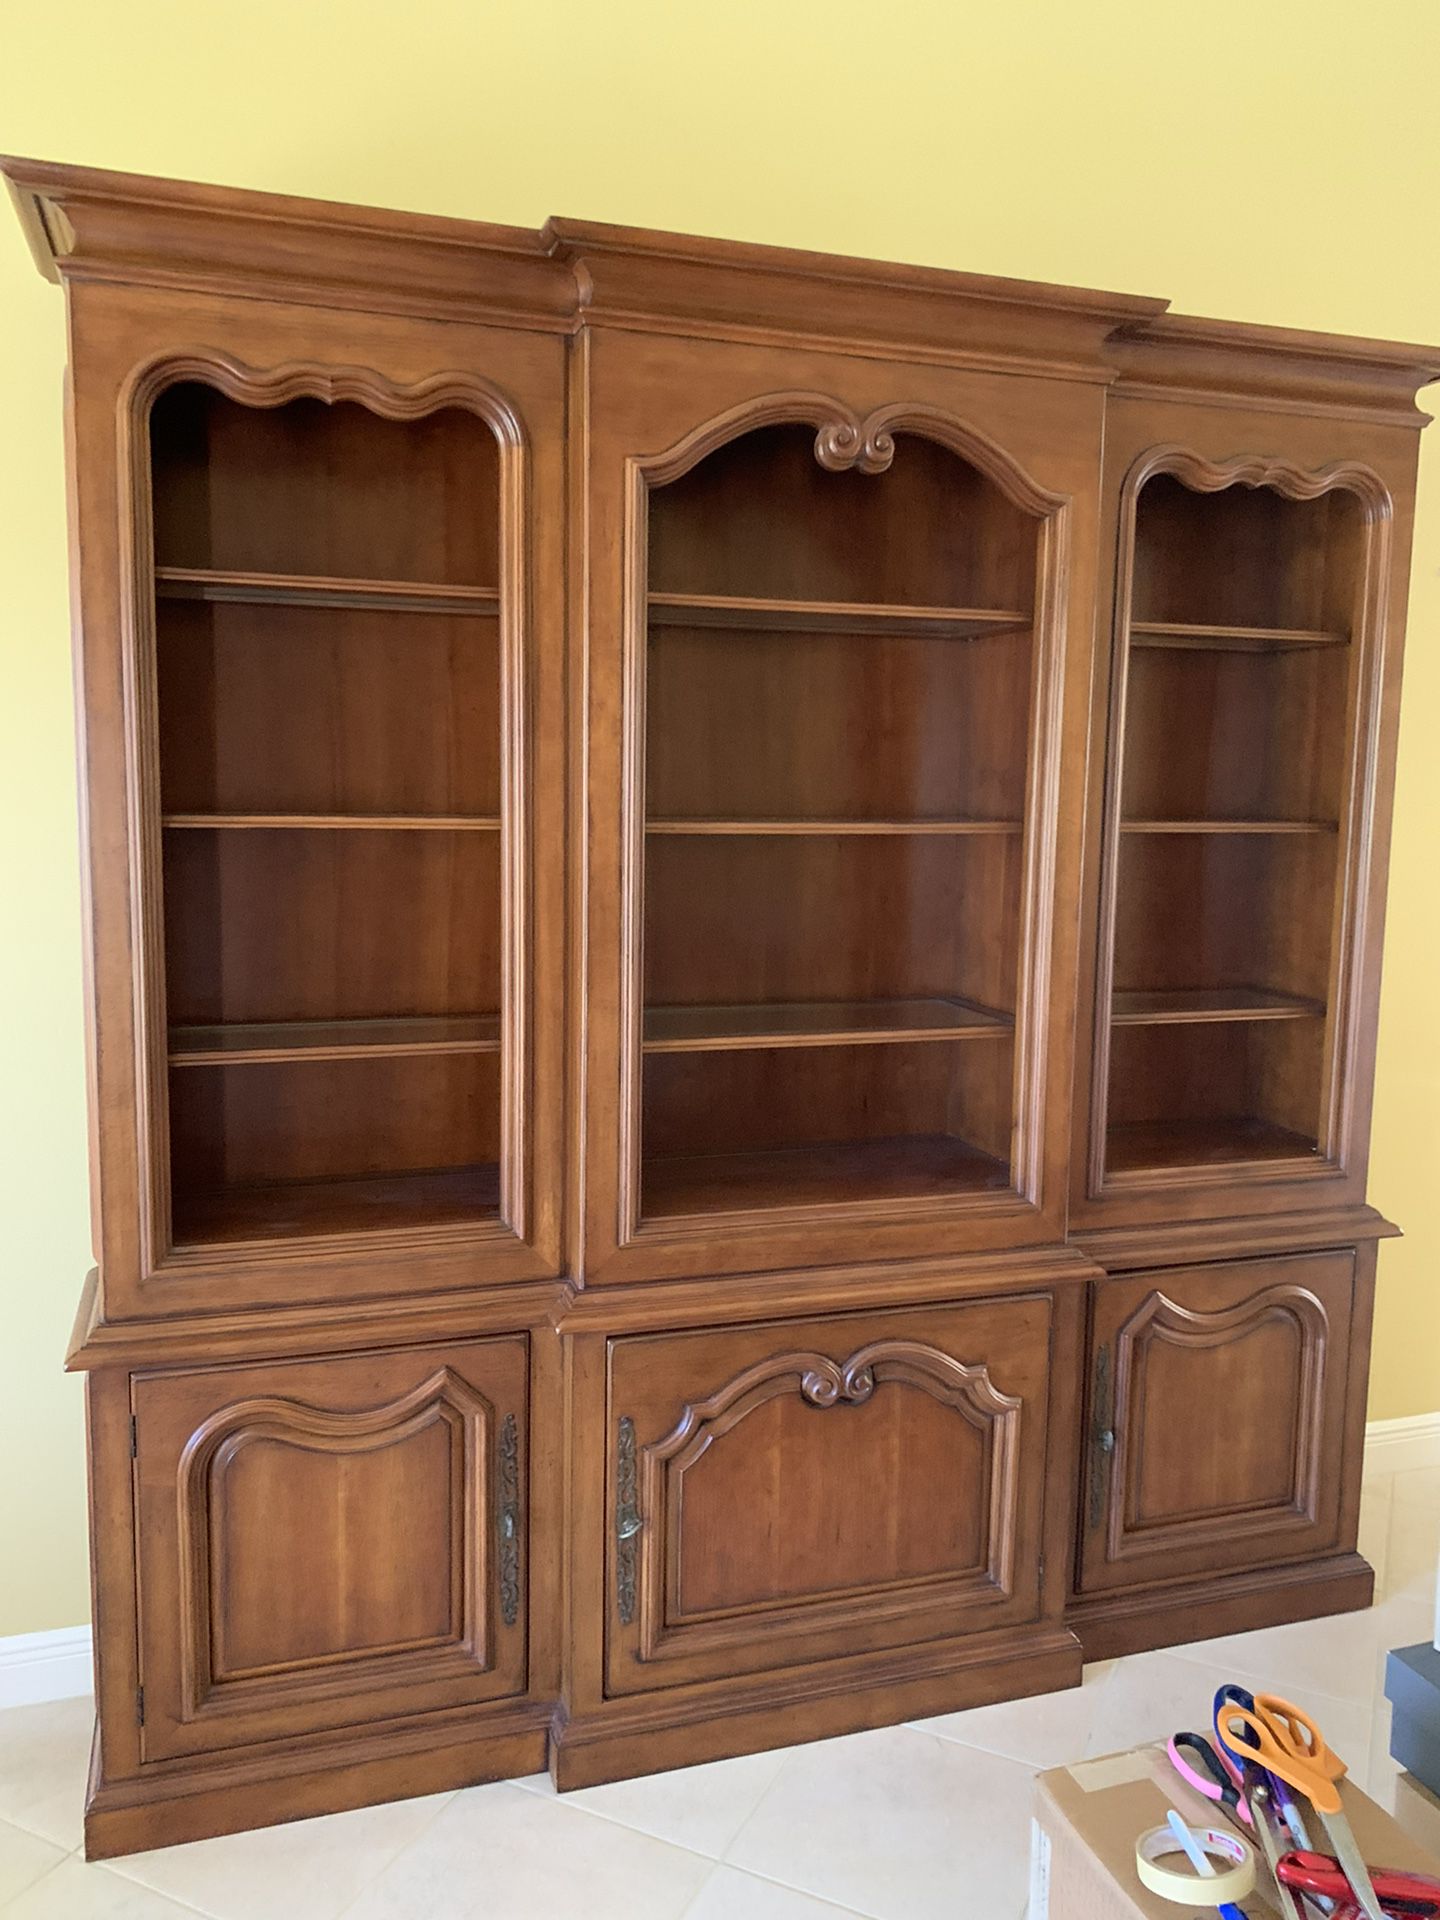 Beautiful Solid Wood Wall Unit Excellent Condition  Free  Needs To Be Picked Up ASAP  Home Sold And It Needs To Go  